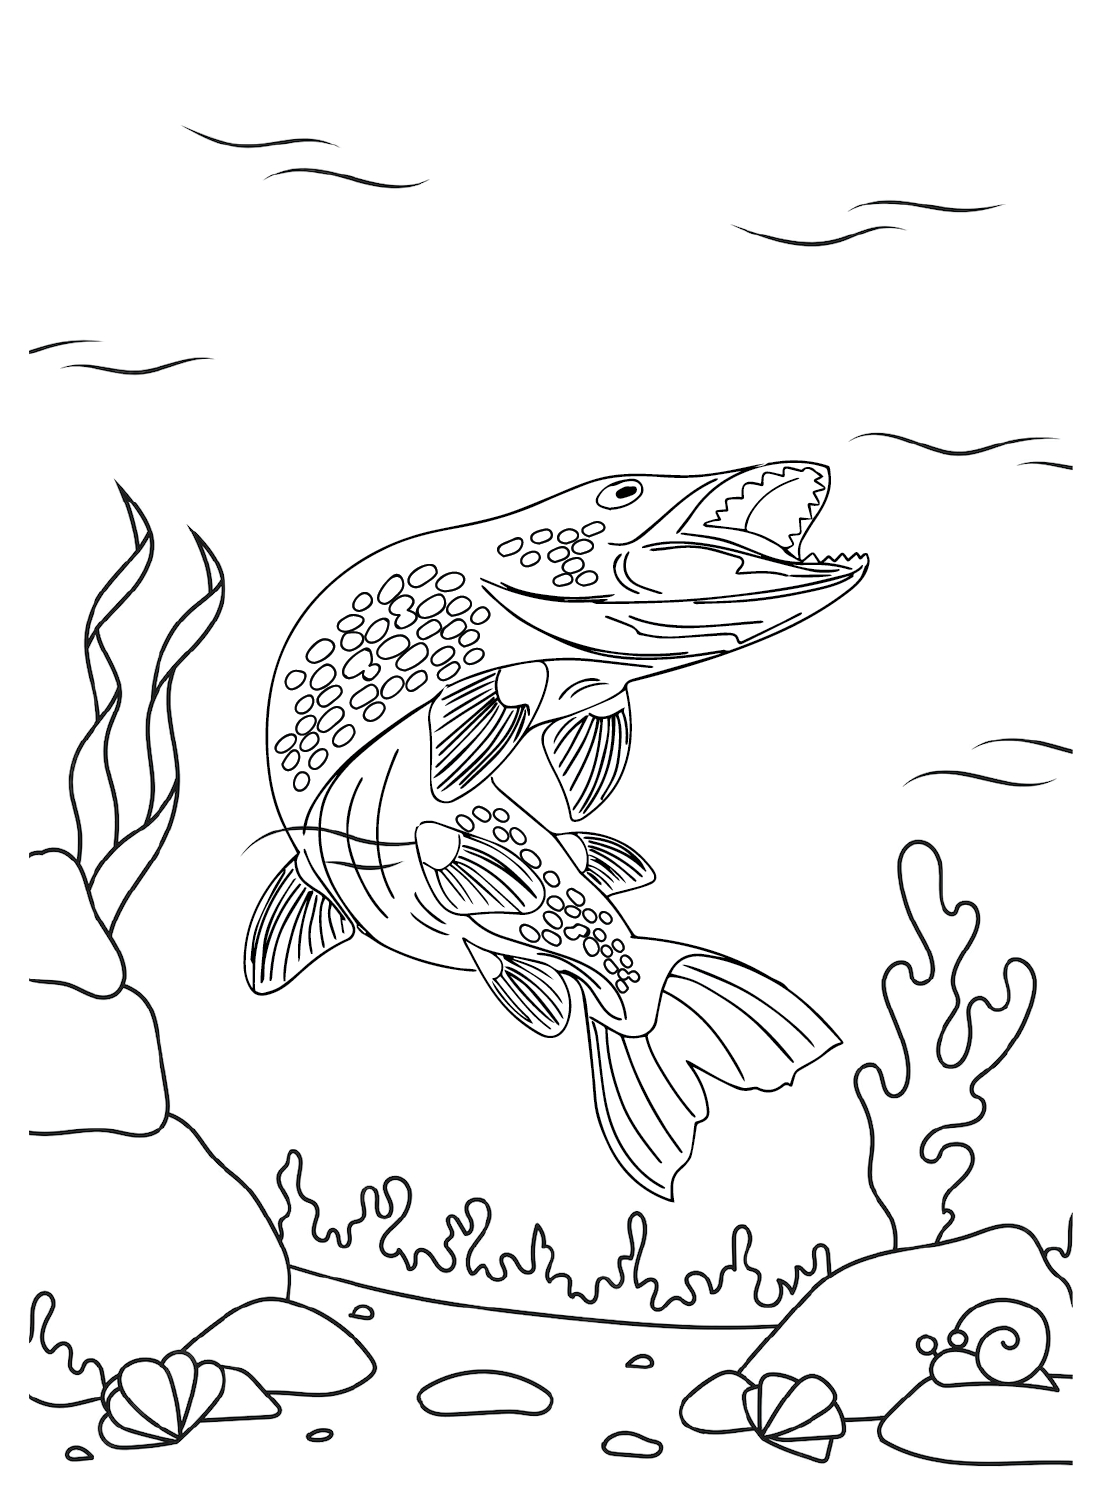 Learn How to Draw a Pike (Fishes) Step by Step : Drawing Tutorials